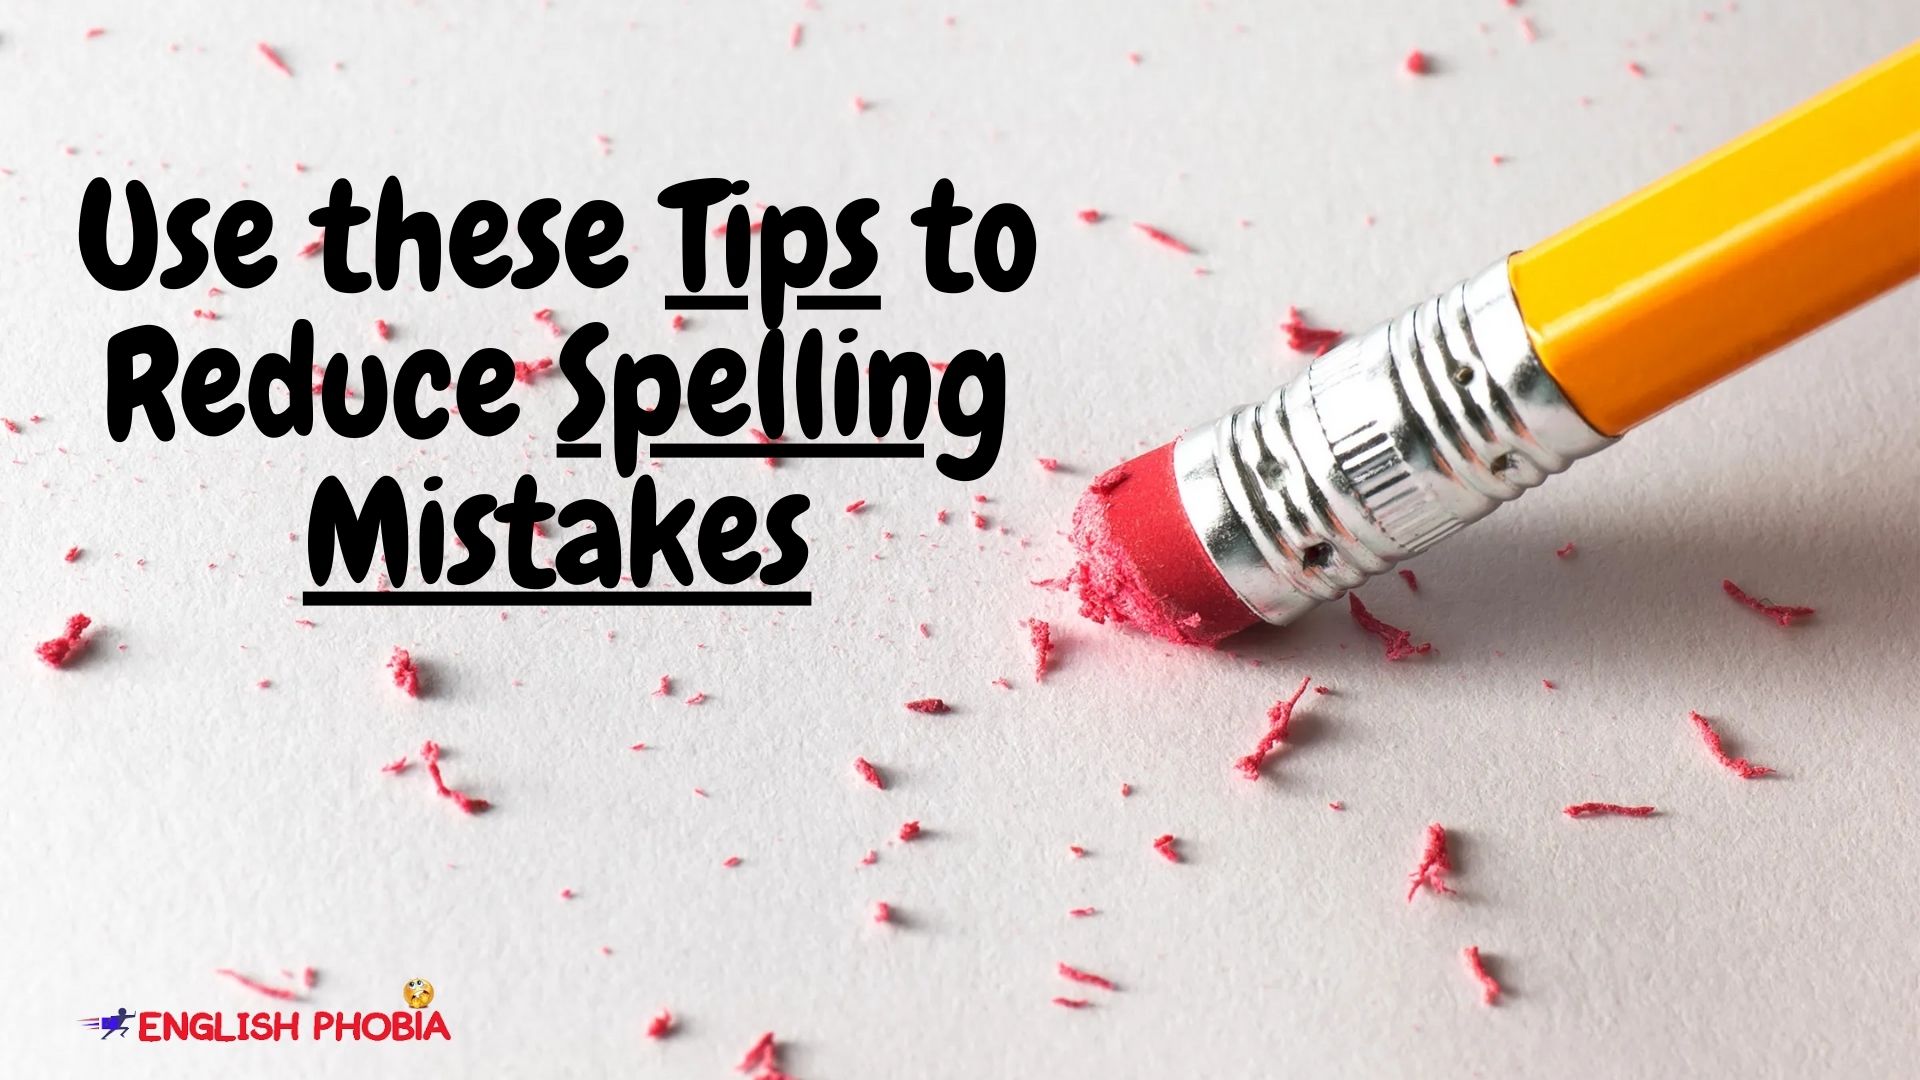 Tips to reduce spelling mistakes